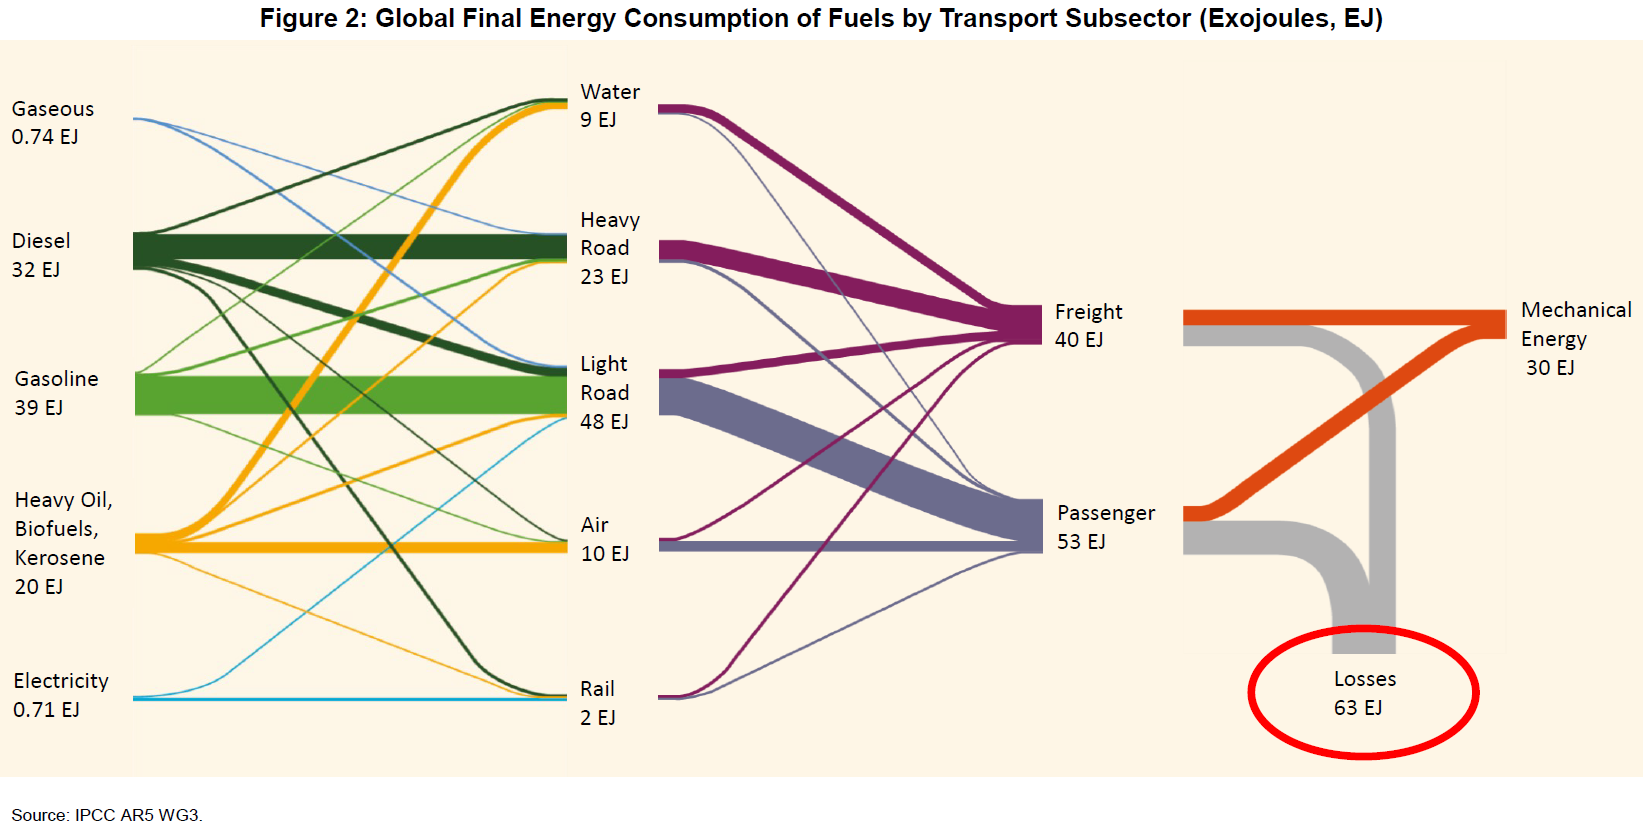 Figure 2 is an energy flow diagram showing global final energy consumption of fuels by transport sub-sectors in 2009 for freight and passengers. Heat losses account for 68% of total fuel energy giving an average conversion efficiency of fuel to kinetic energy of 32%.